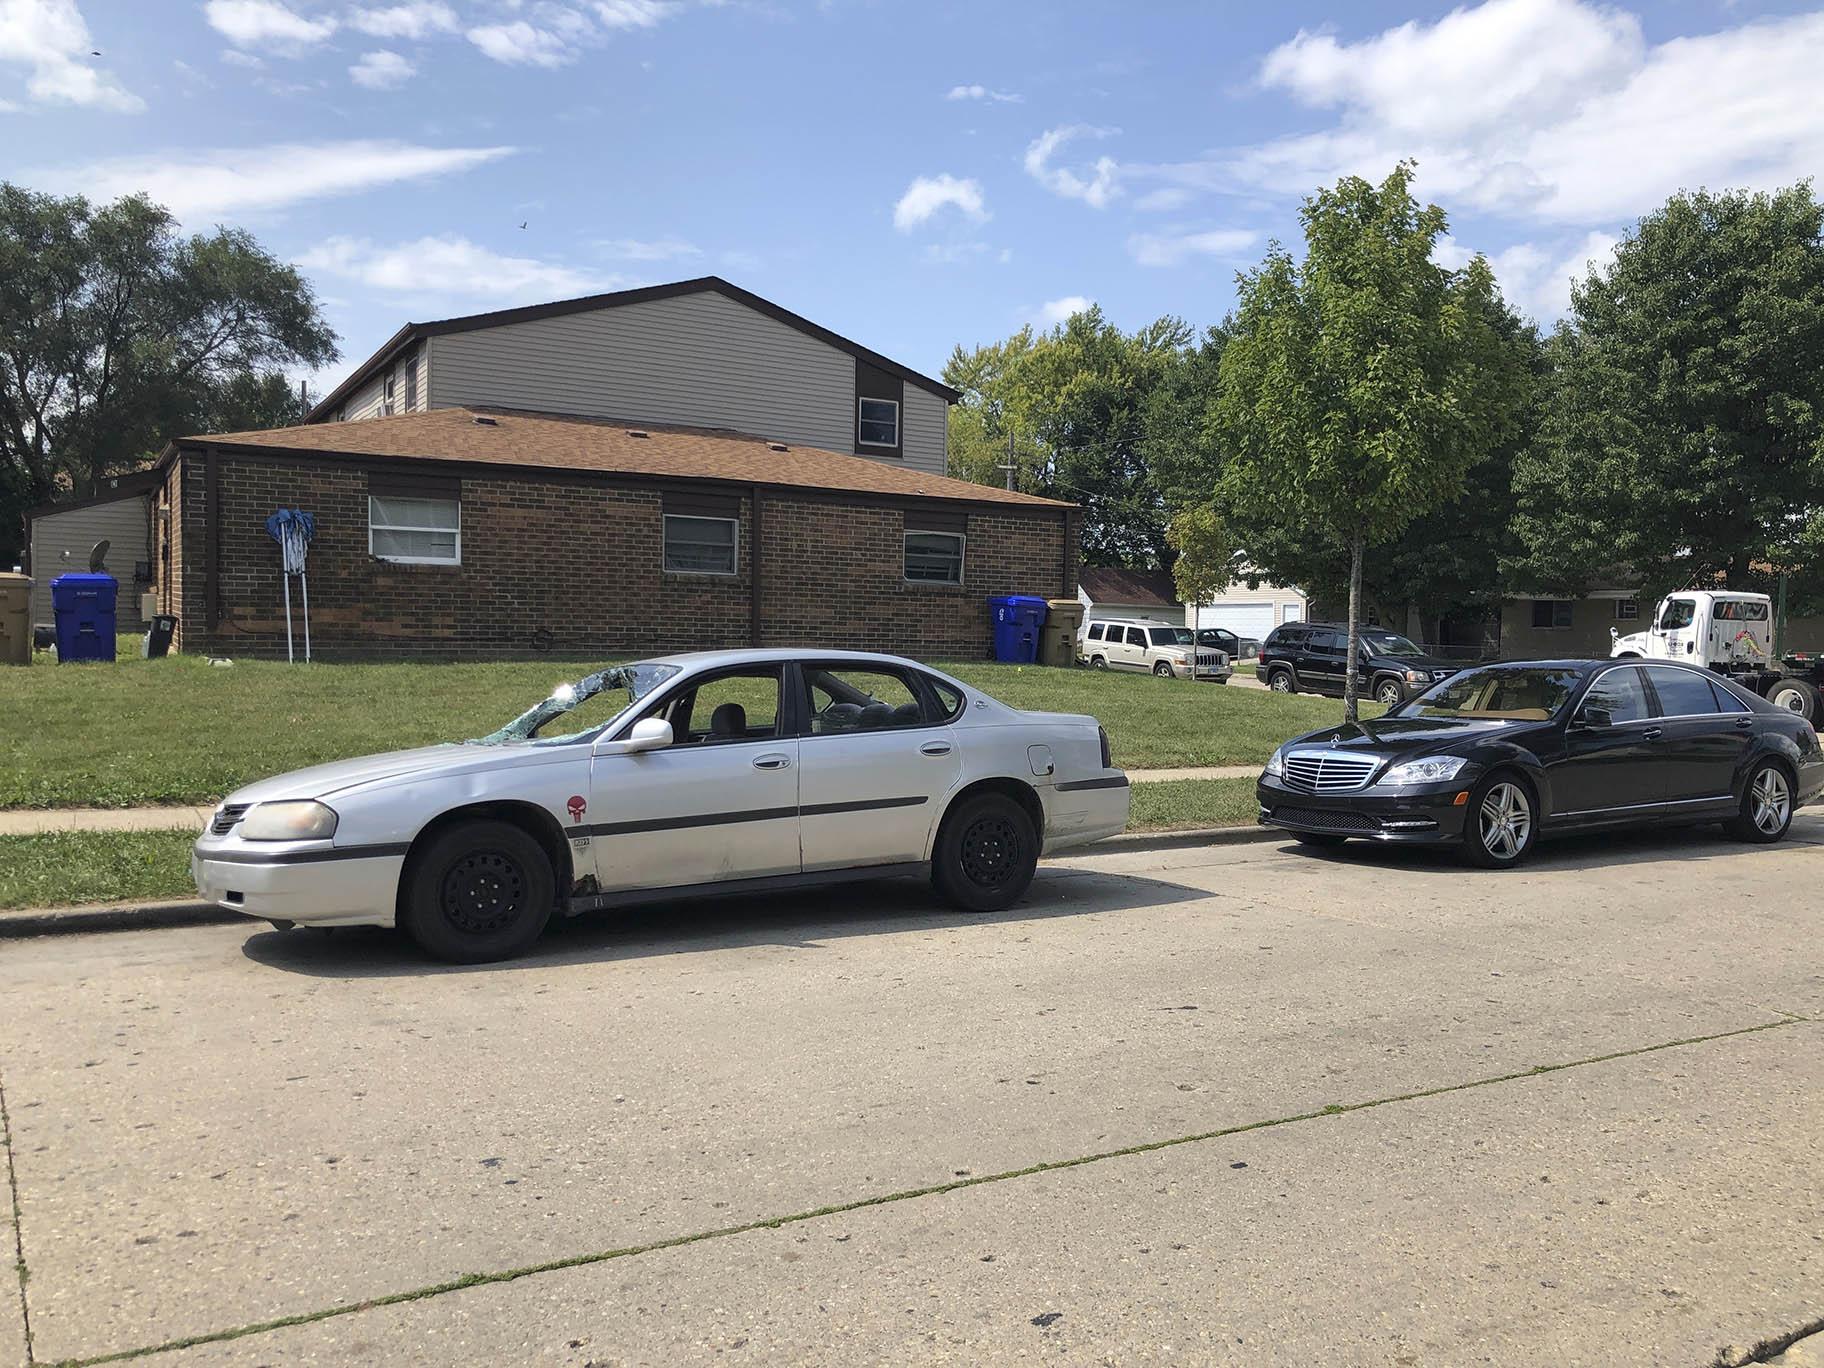 Vehicles are parked Friday, Aug. 28, 2020, in Kenosha, Wis., where Jacob Blake, a Black man, was shot by police on Aug. 23. (AP Photo / Russell Contreras)